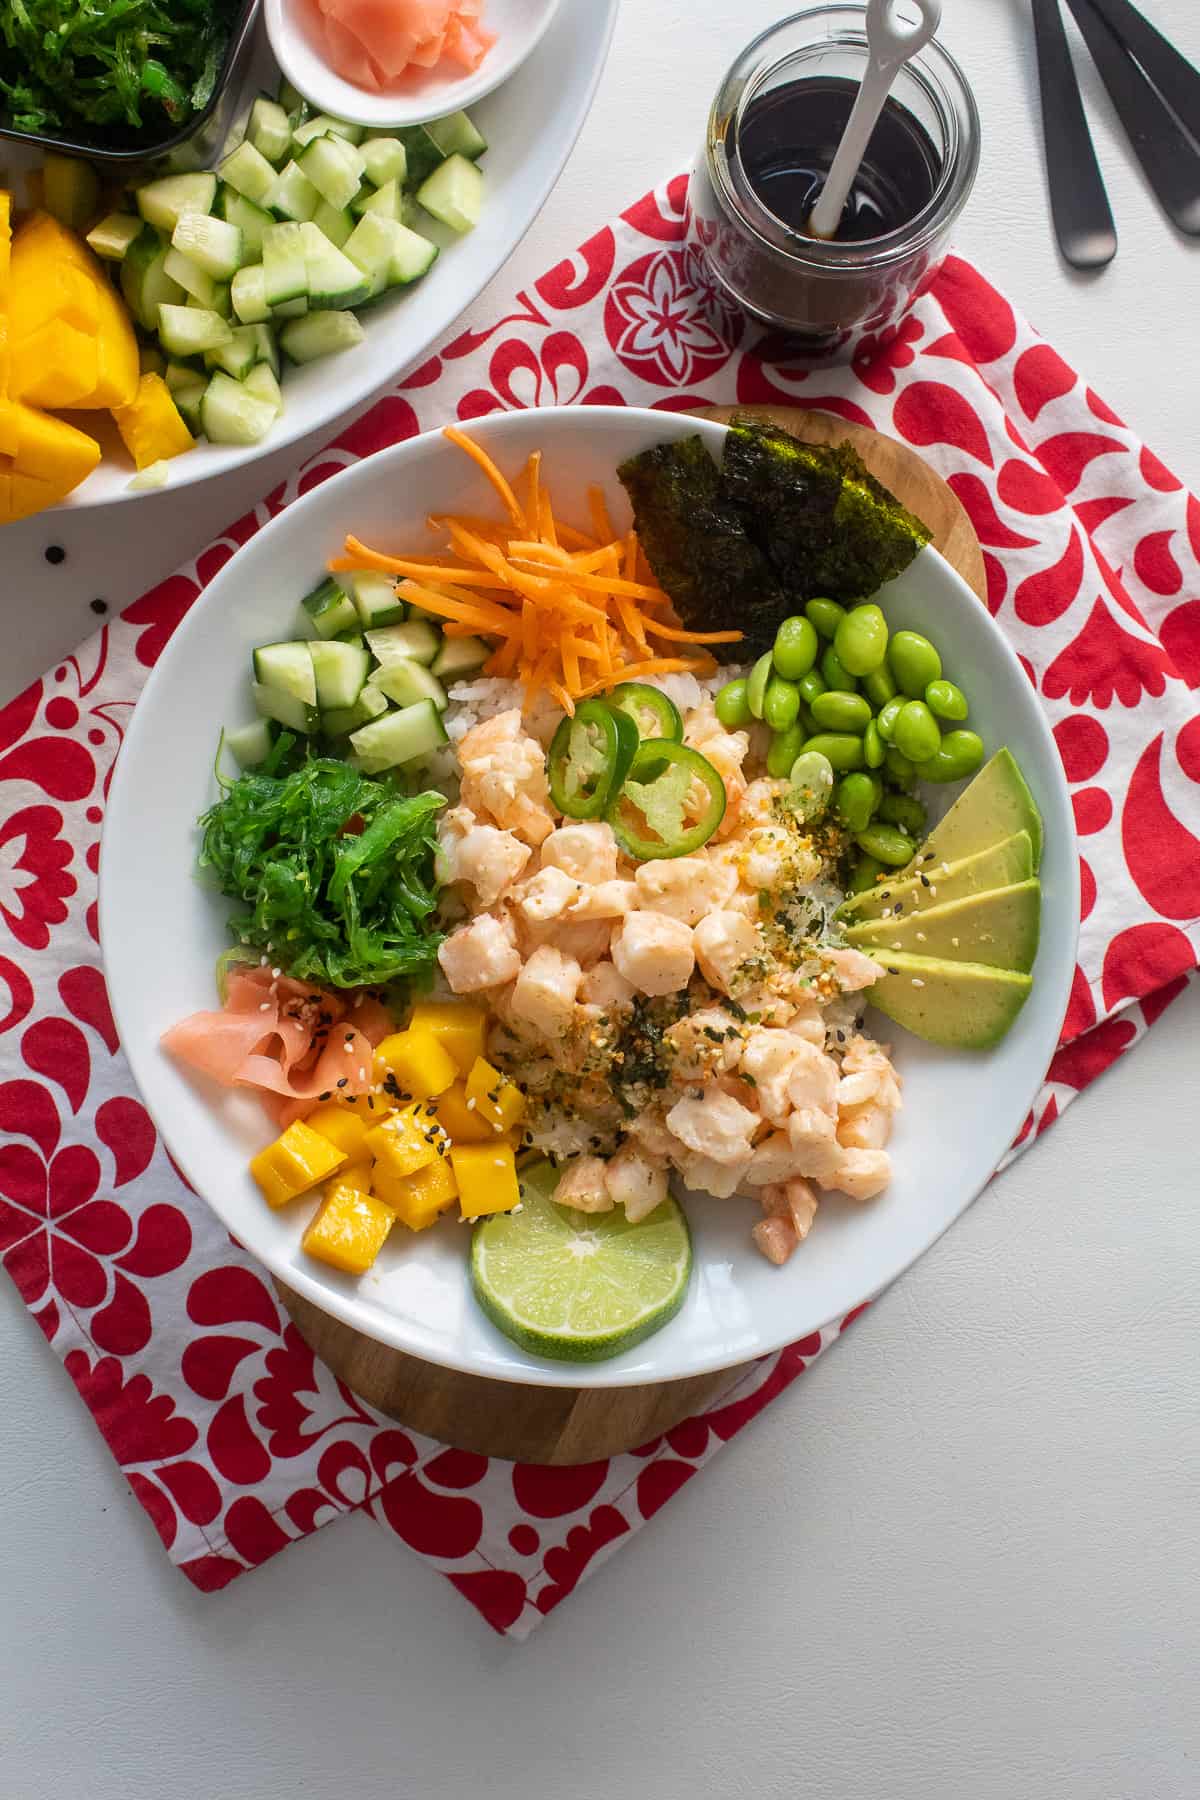 A white bowl containing shrimp poke and a variety of toppings sits on top of a red and white patterned cloth alongside a jar of dark sauce and a platter of additional toppings.